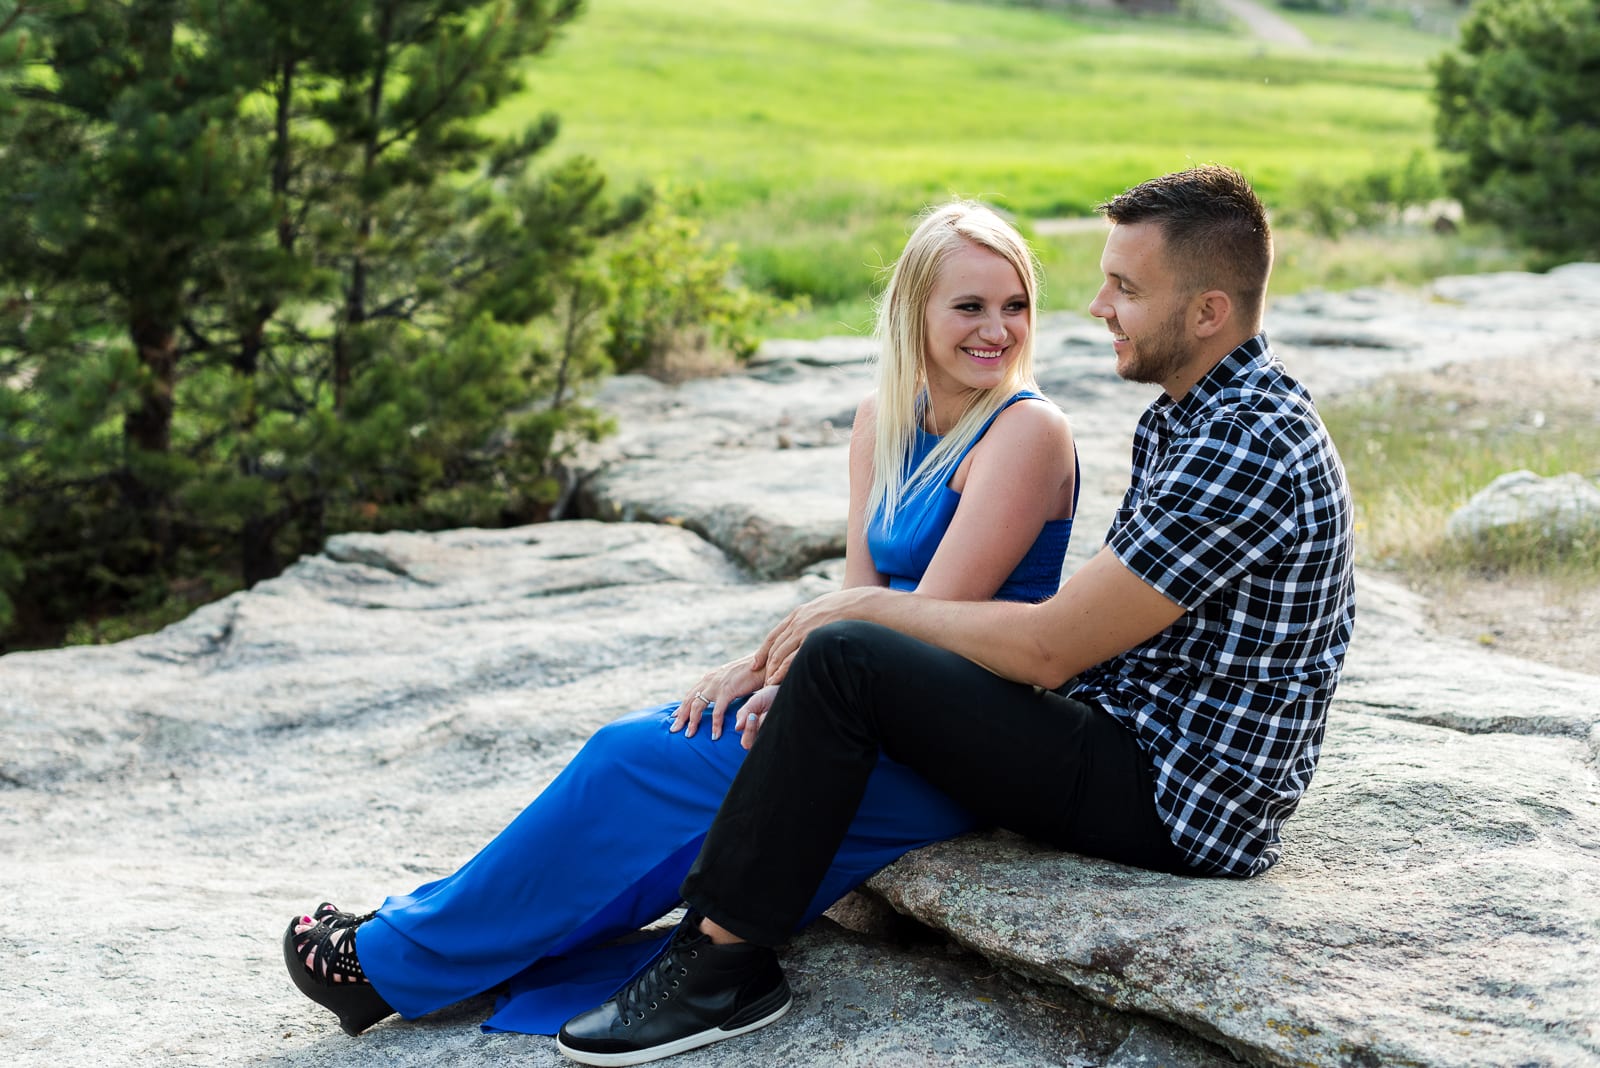 A Galactic Engagement | Engagement | Alderfer Park | From the Hip Photo